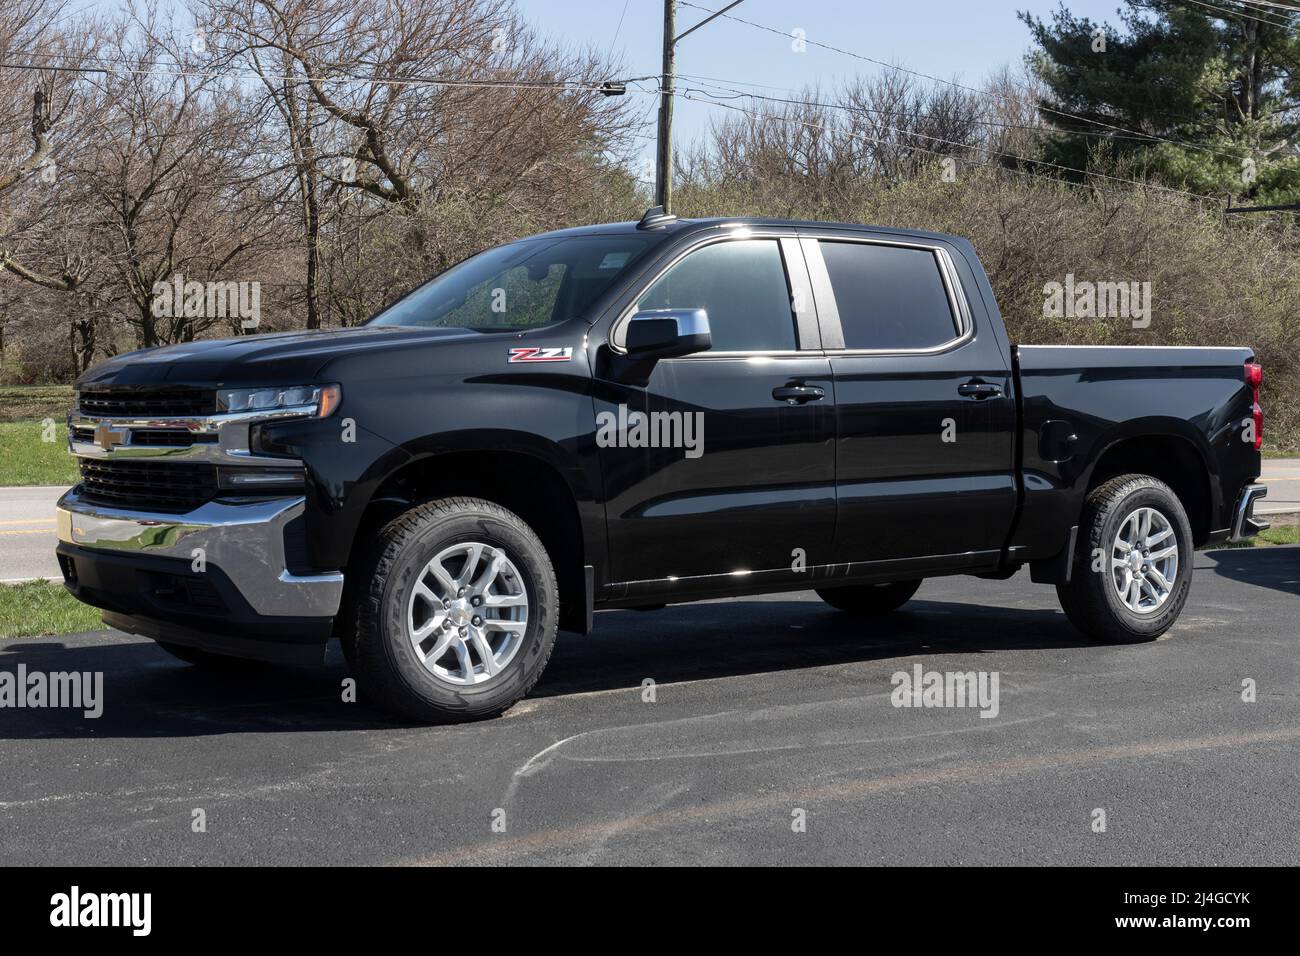 Logansport - Circa April 2022: Chevrolet Silverado 1500 Z71 display at a dealership. Chevy offers the Silverado in street, commercial and off-road mod Stock Photo